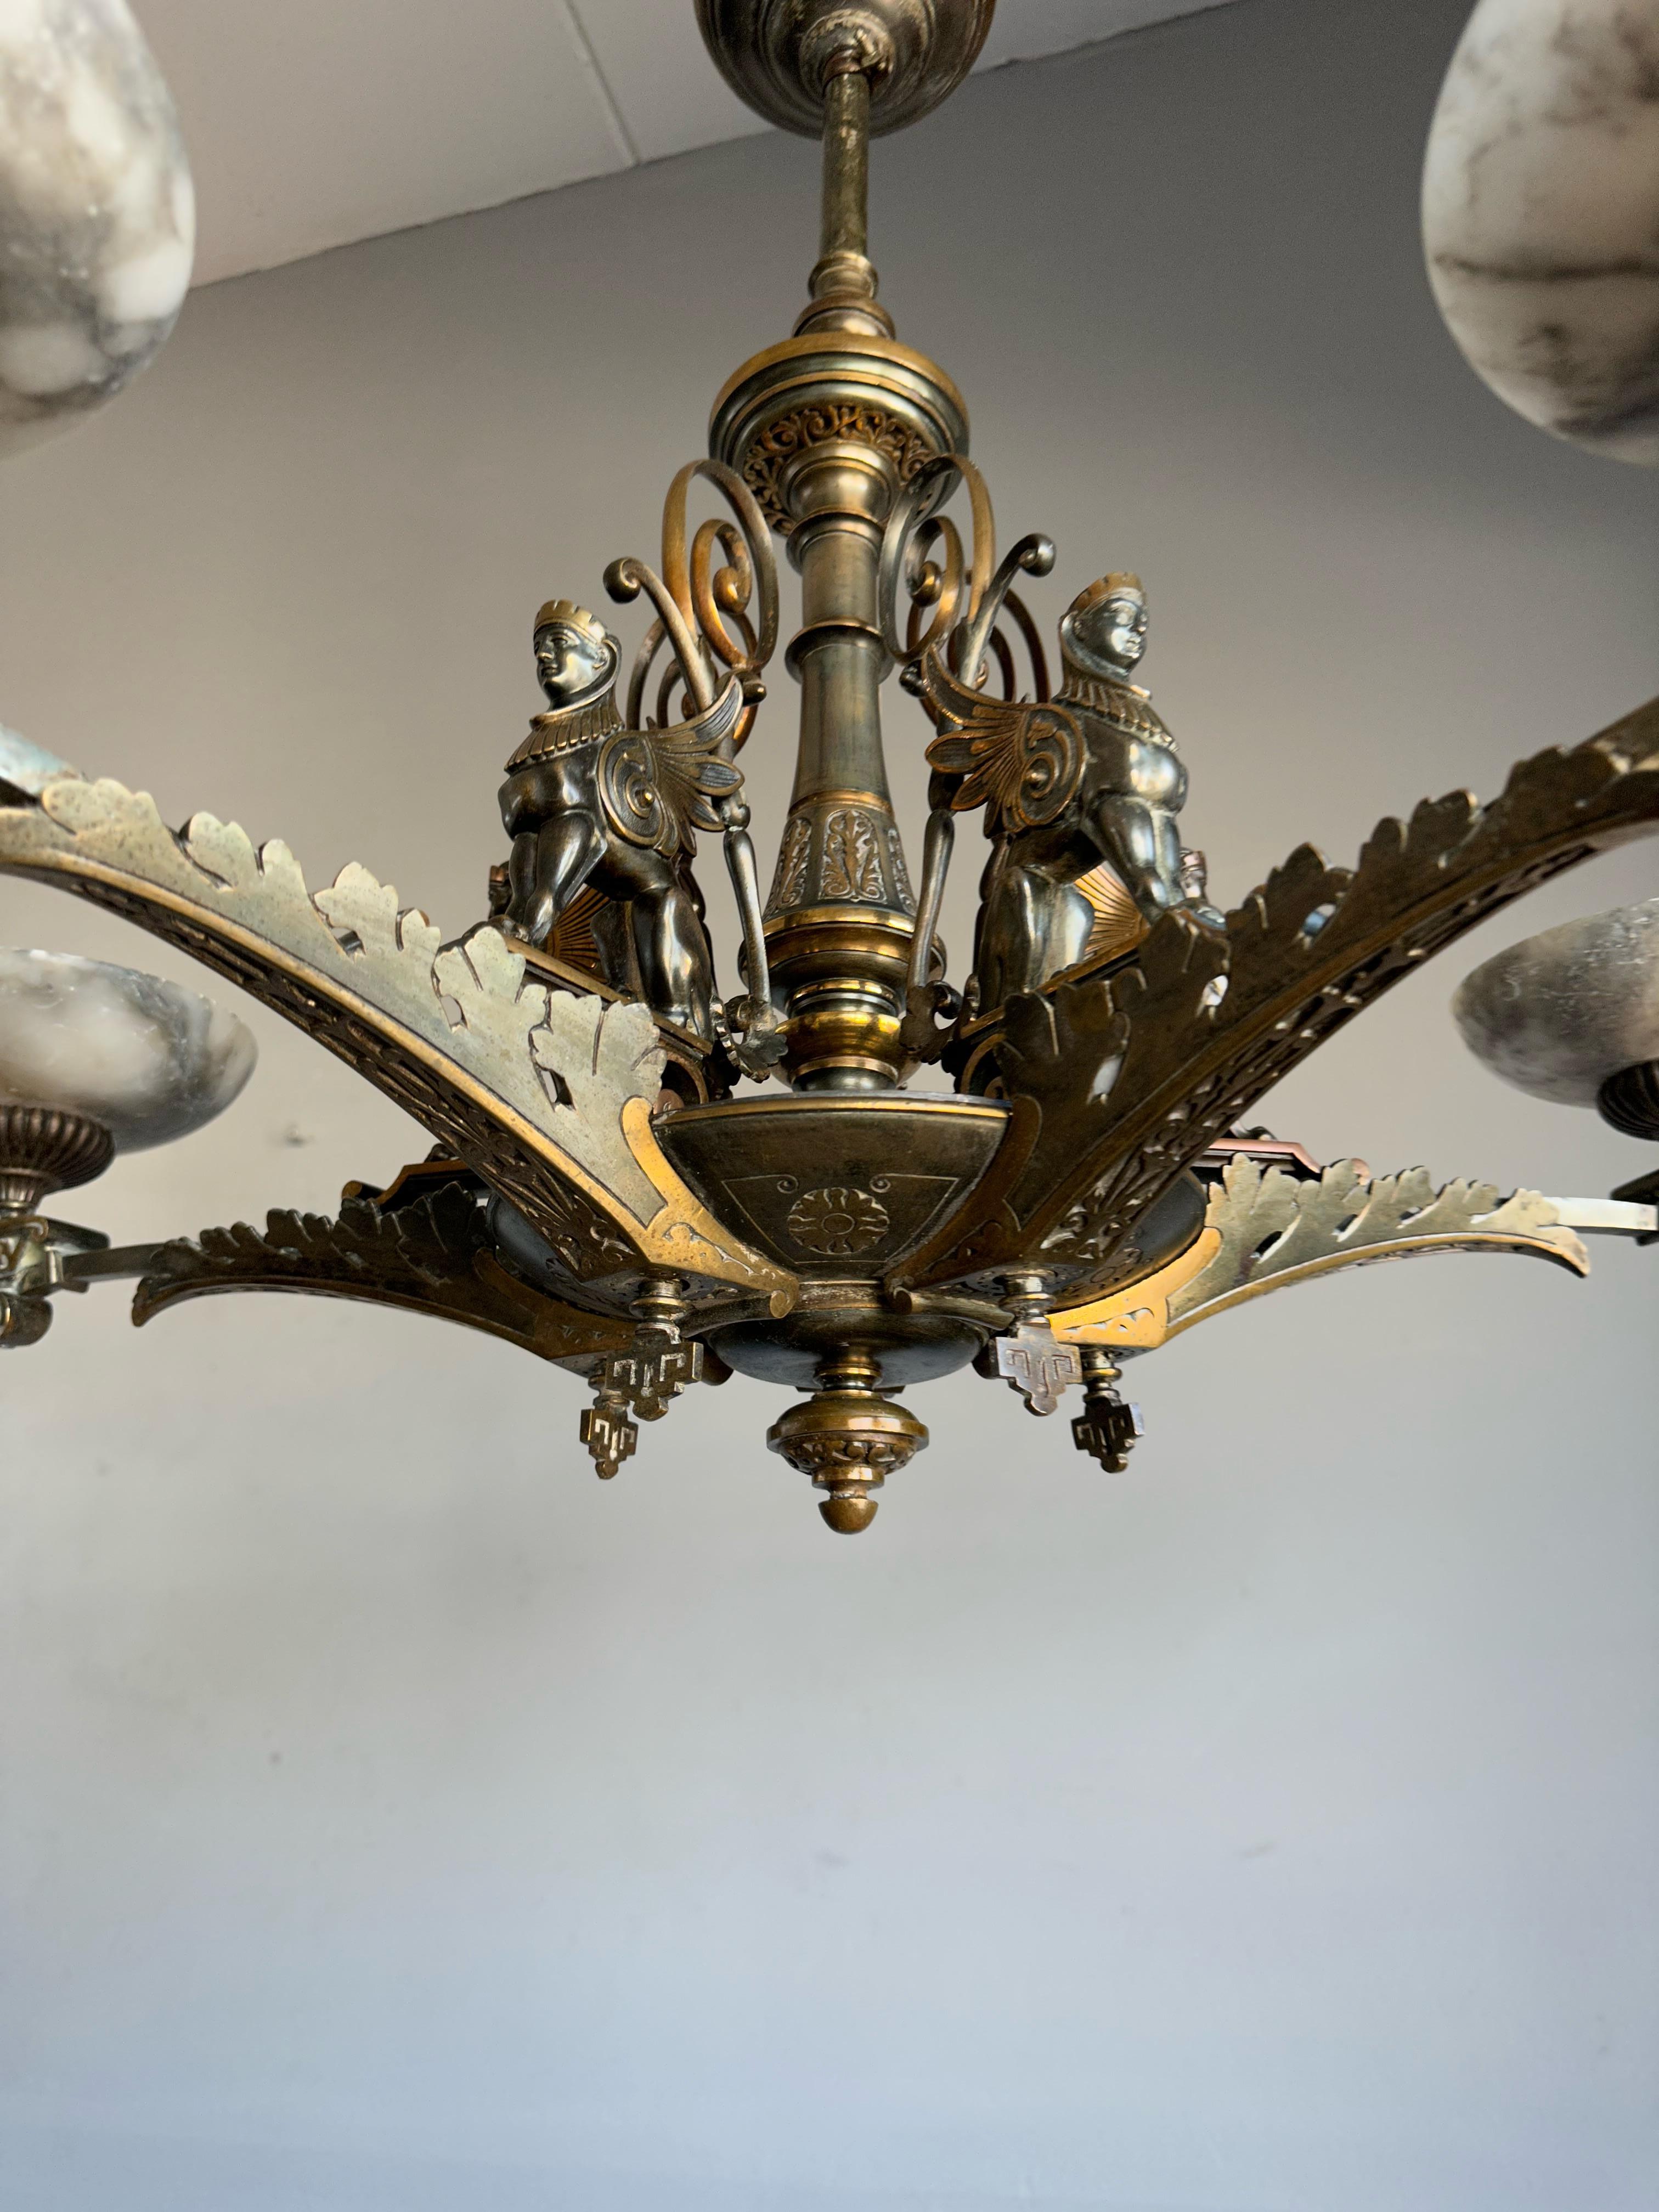 Antique rewired electrified (was original gas) 5-light pendant with sitting Sphinx sculptures.

The first owner of this top of the line, sculptural chandelier would have been very wealthy. This finest of Egyptian Revival examples of 19th century